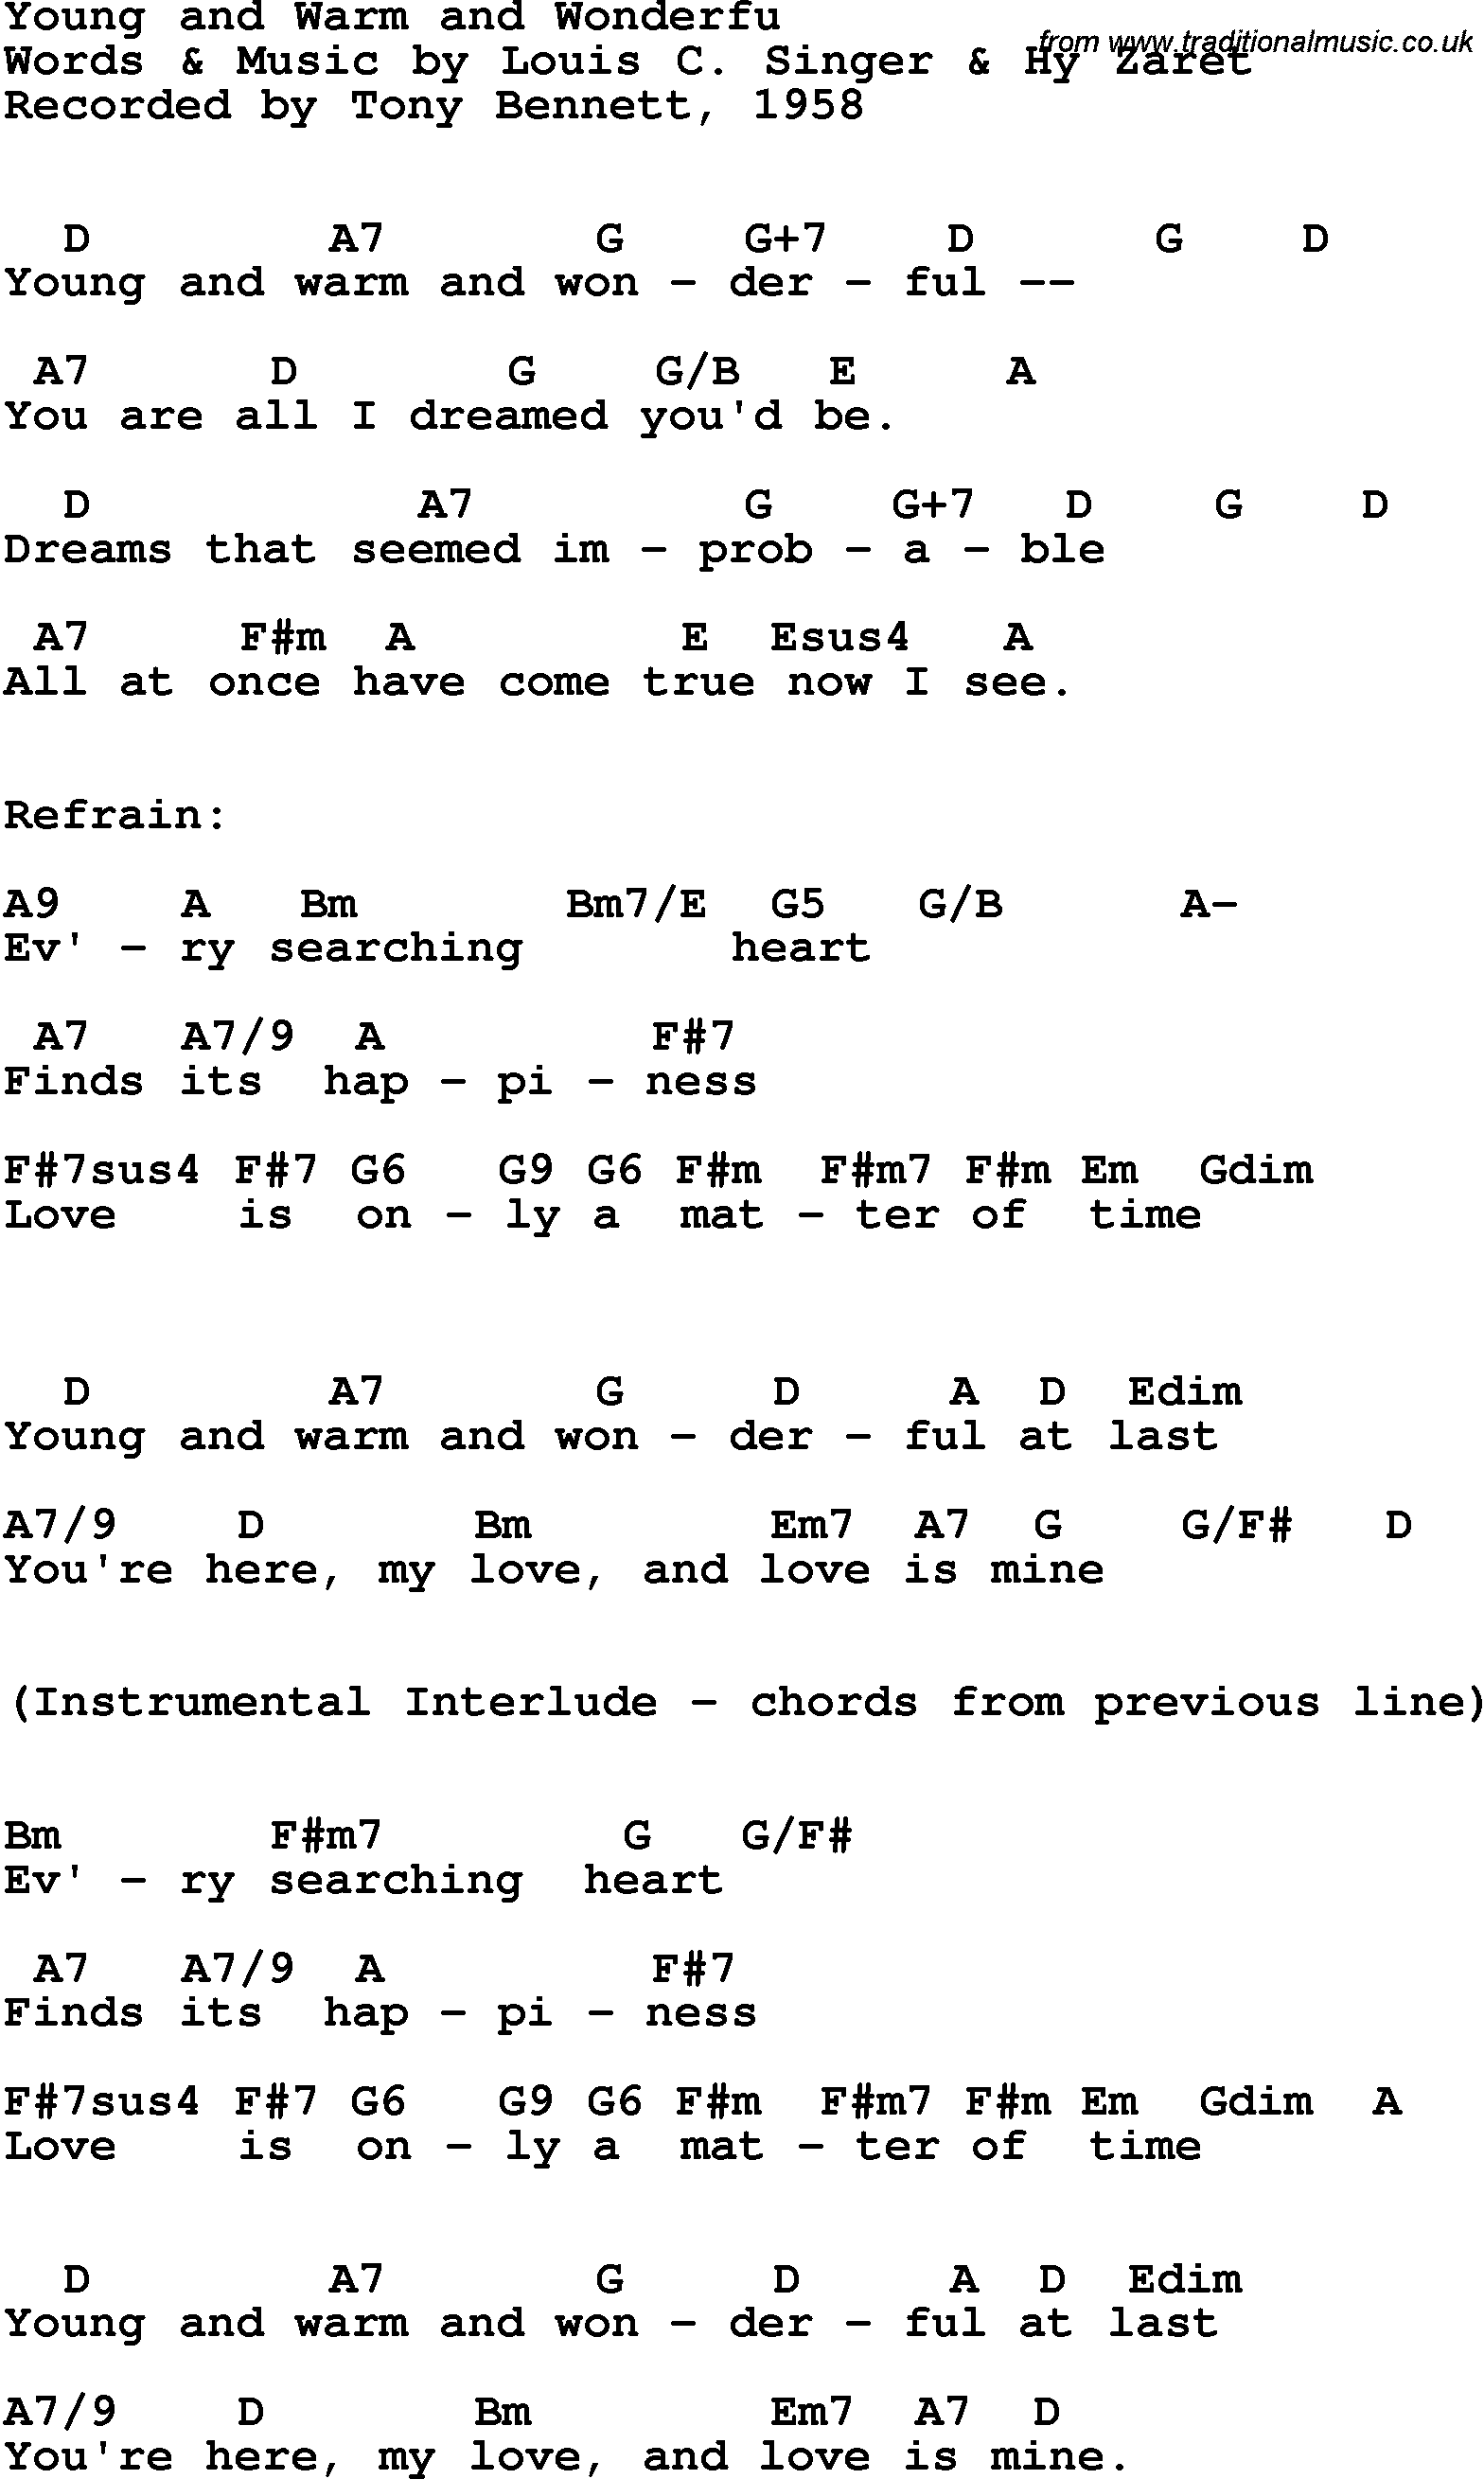 Song Lyrics with guitar chords for Young And Warm And Wonderful - Tony Bennett, 1958